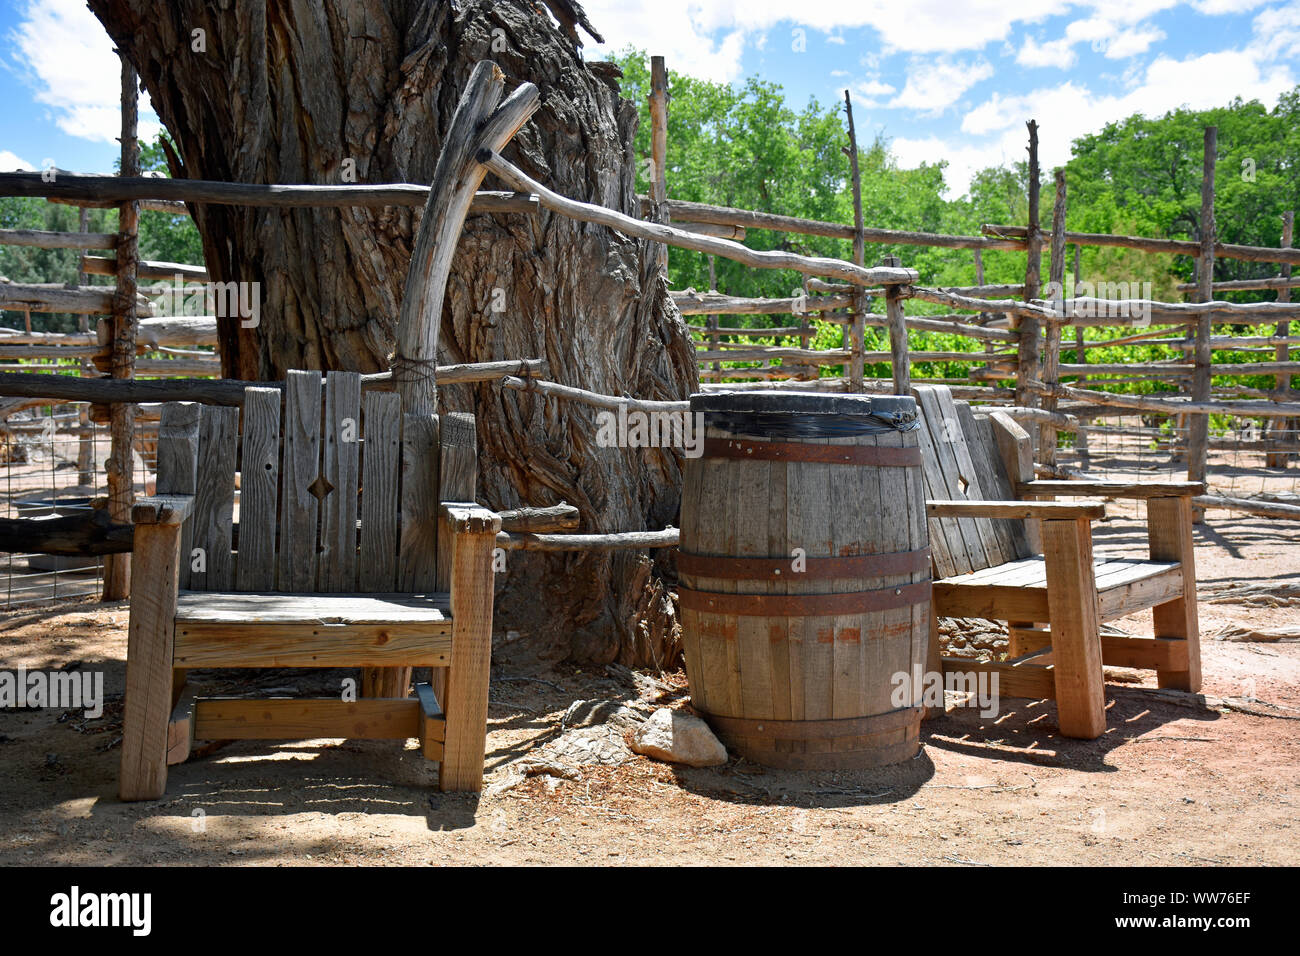 Barn Yard Chairs and Barrel at the Heritage Farm in New Mexico. Stock Photo